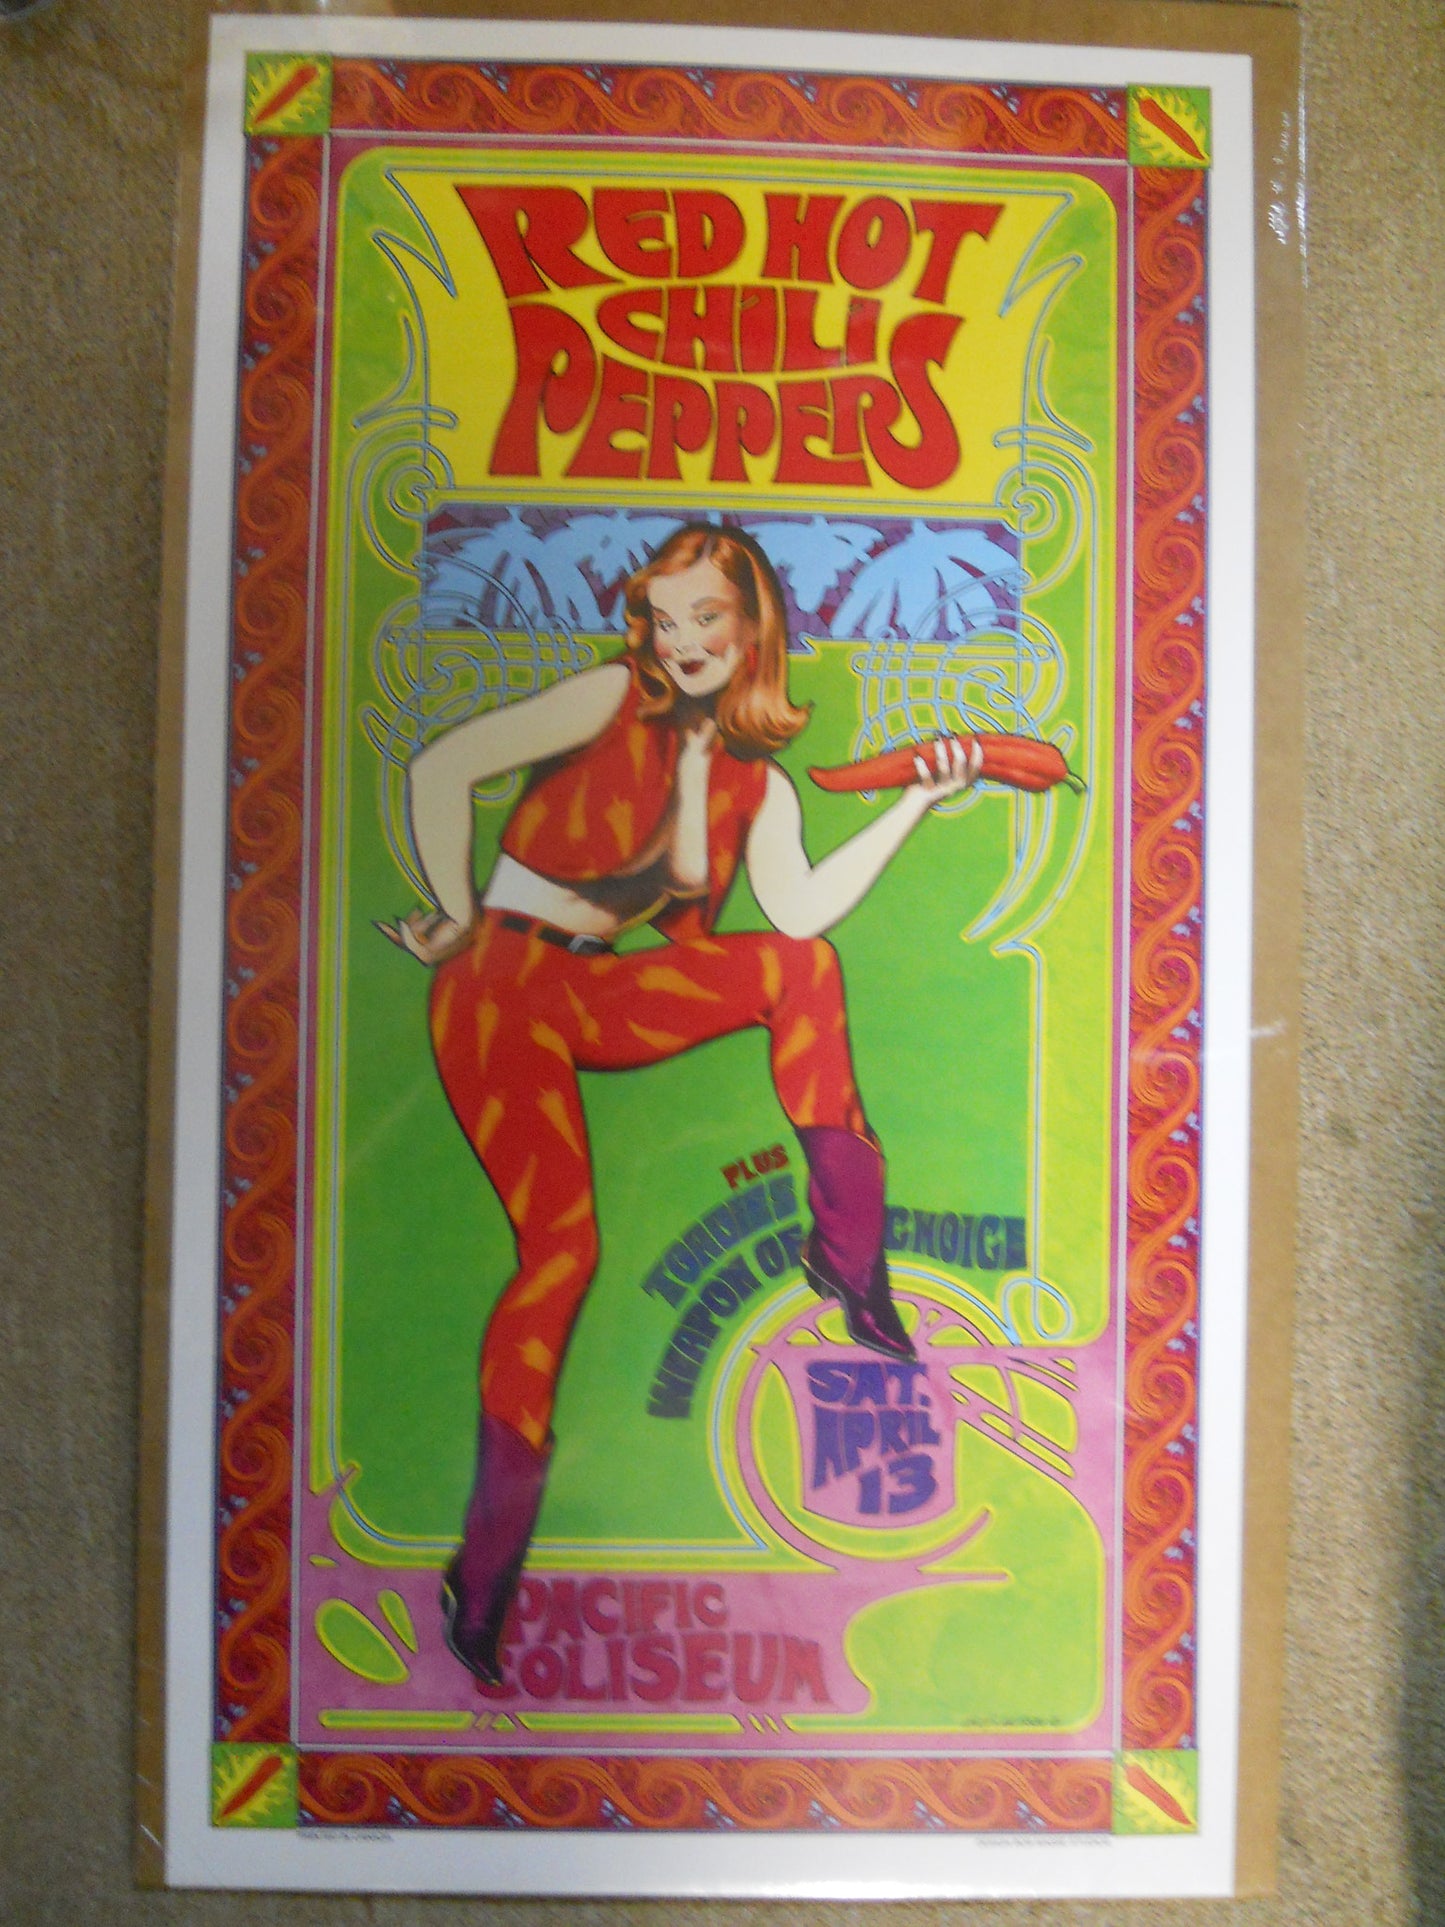 Red Hot Chili Peppers Art Nouveau Poster - HalfMoonMusic